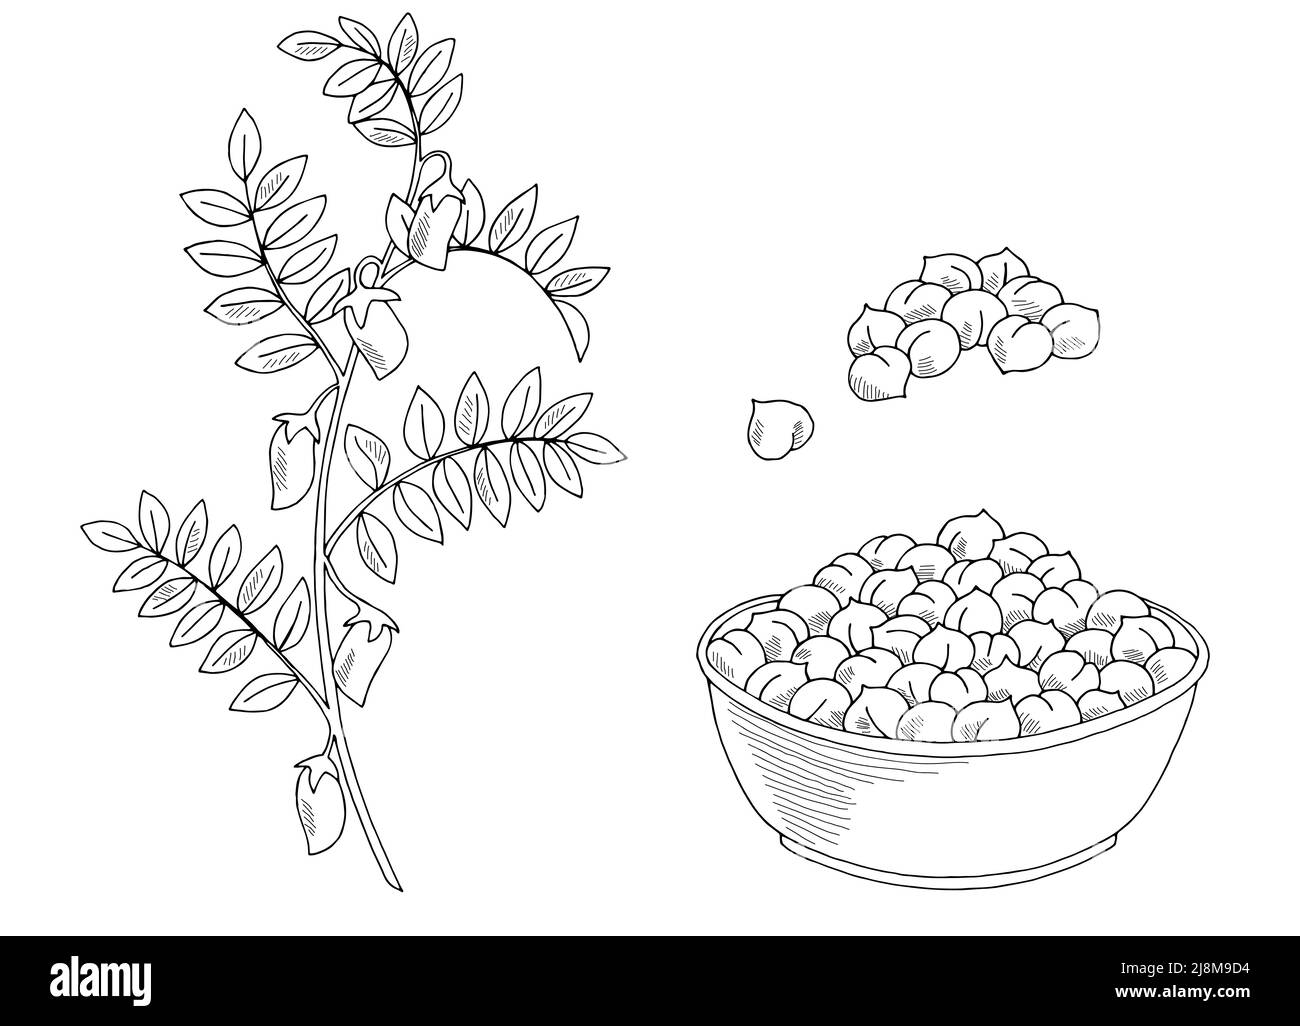 Chickpeas plant graphic black white isolated sketch illustration vector Stock Vector